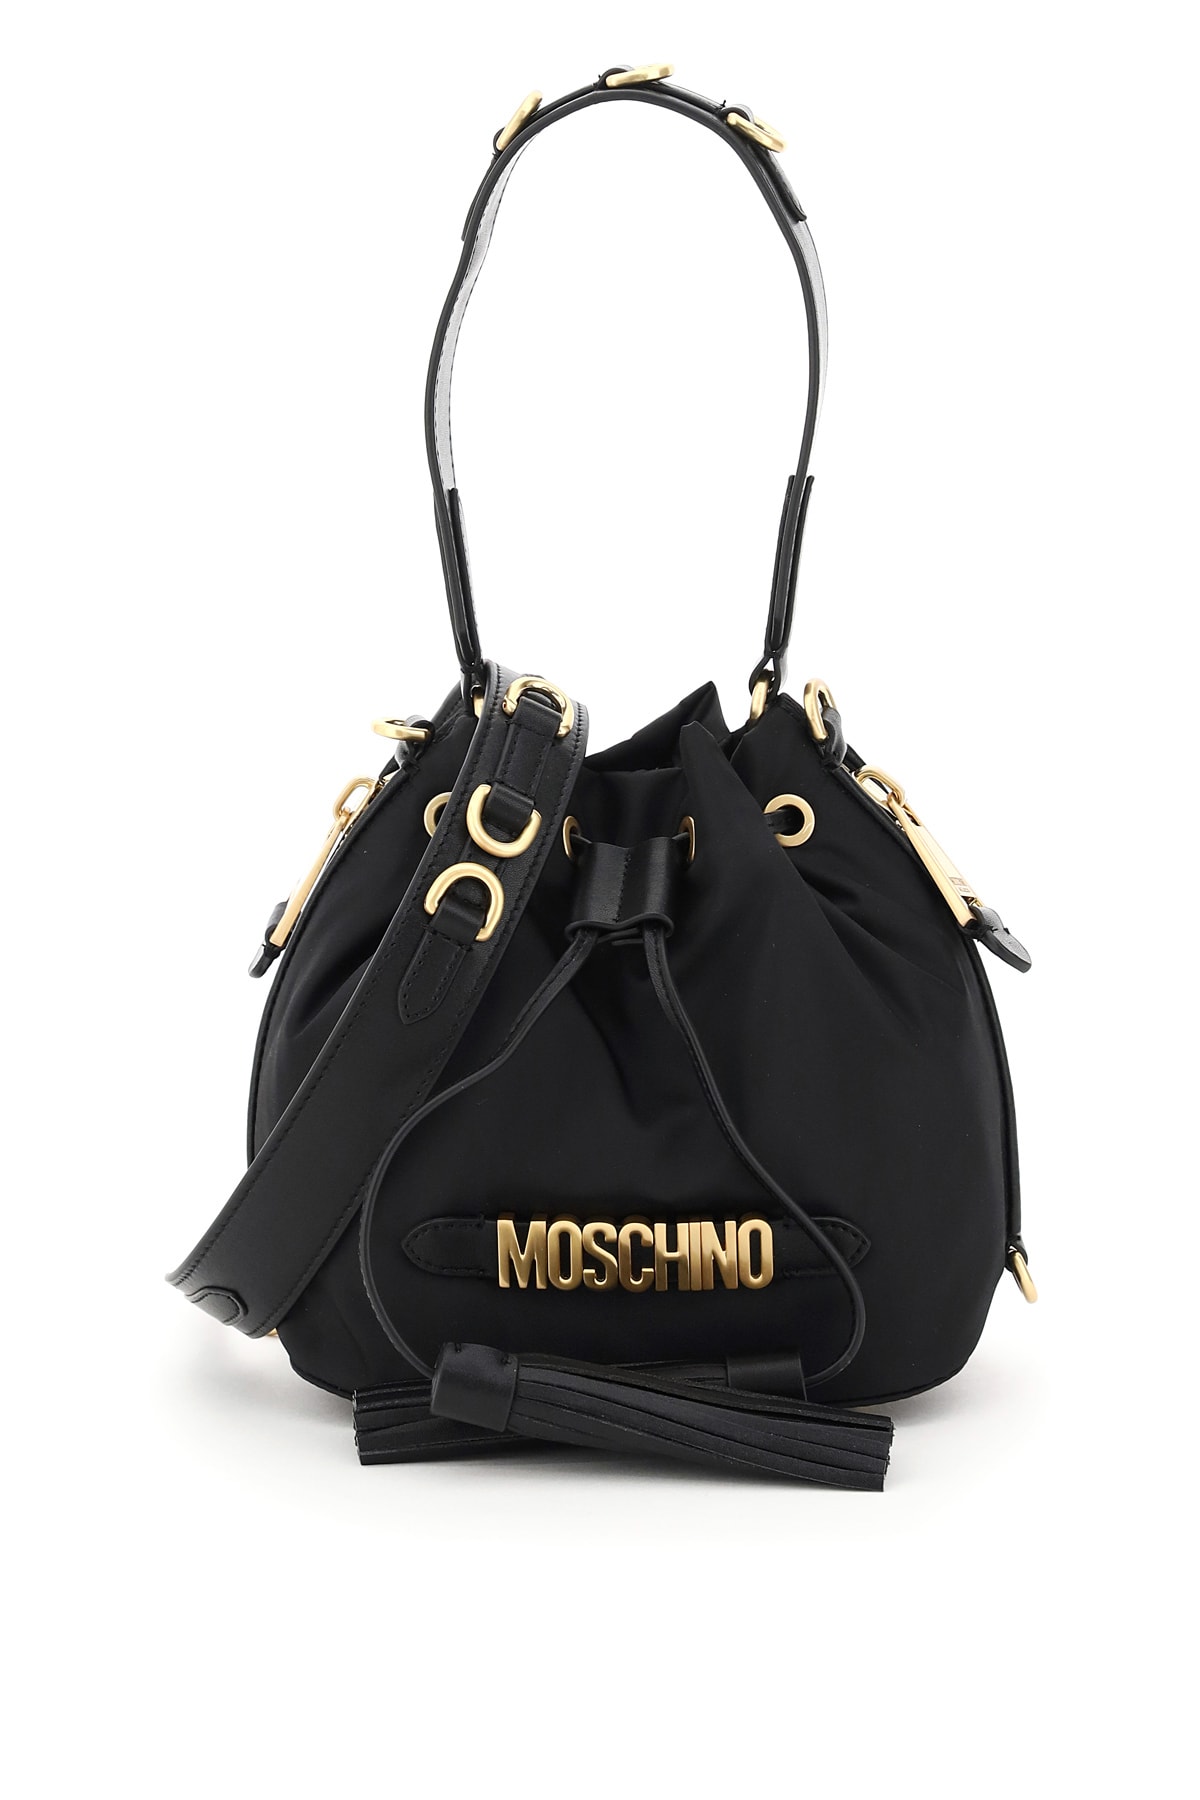 Moschino Bucket Bag With Tassels